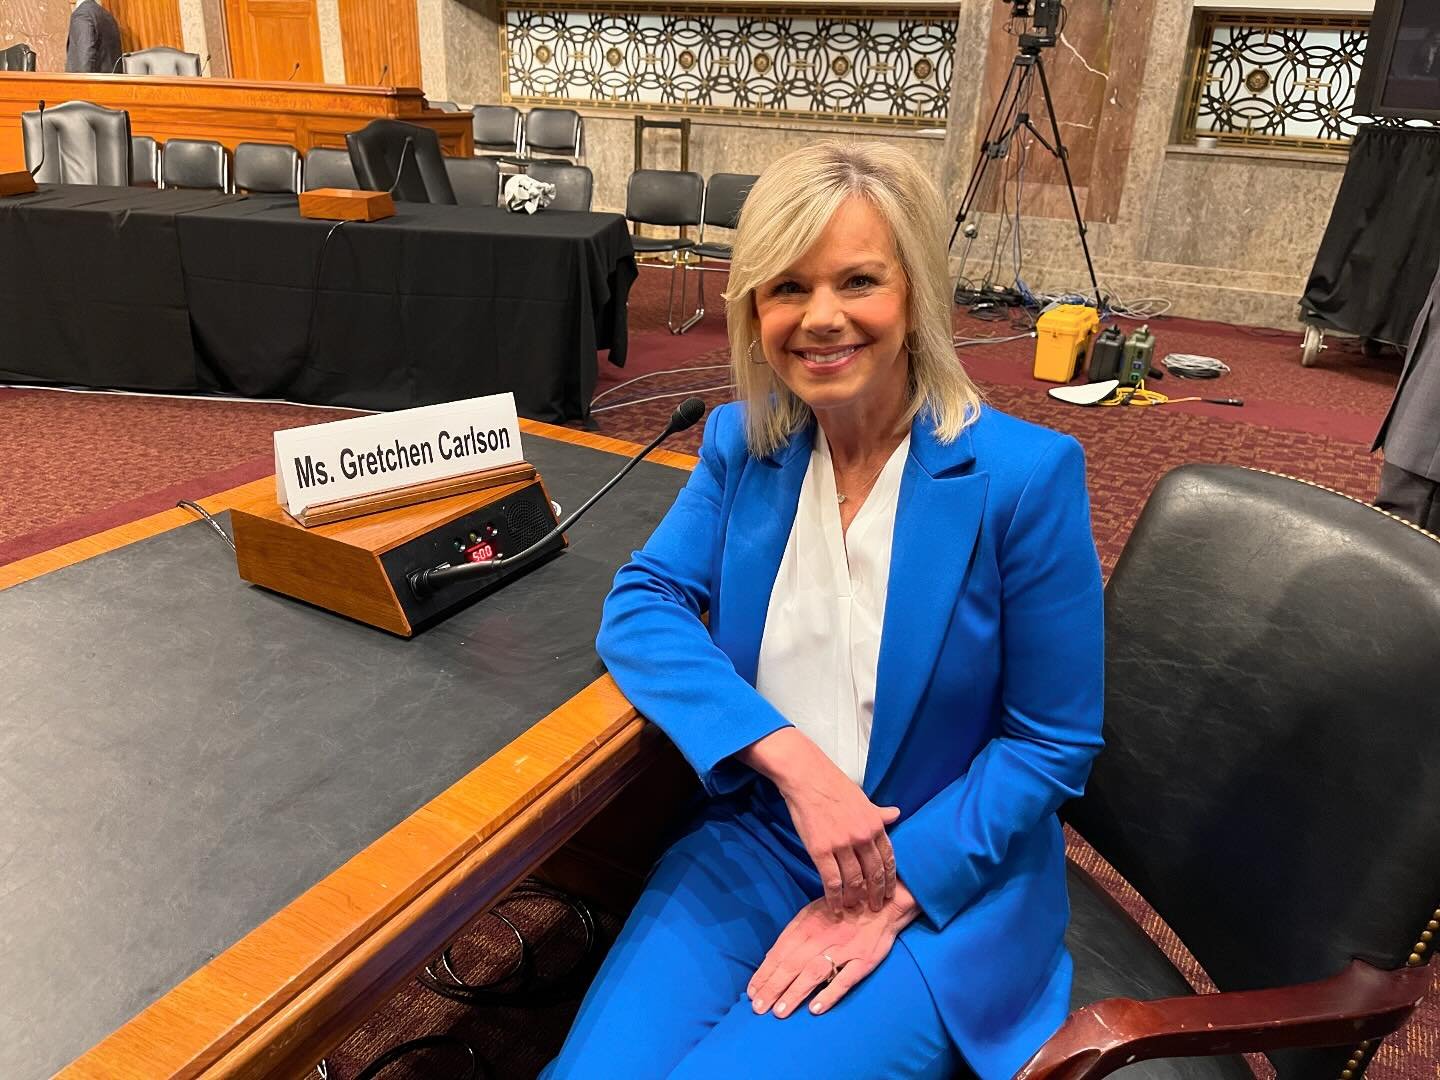 Sitting in the hot seat today - testifying before the Senate Judiciary Committee about forced arbitration and our new bipartisan bill the Protecting Older Americans Act for age discrimination. That means anyone over 40!!! My testimony is in the link 